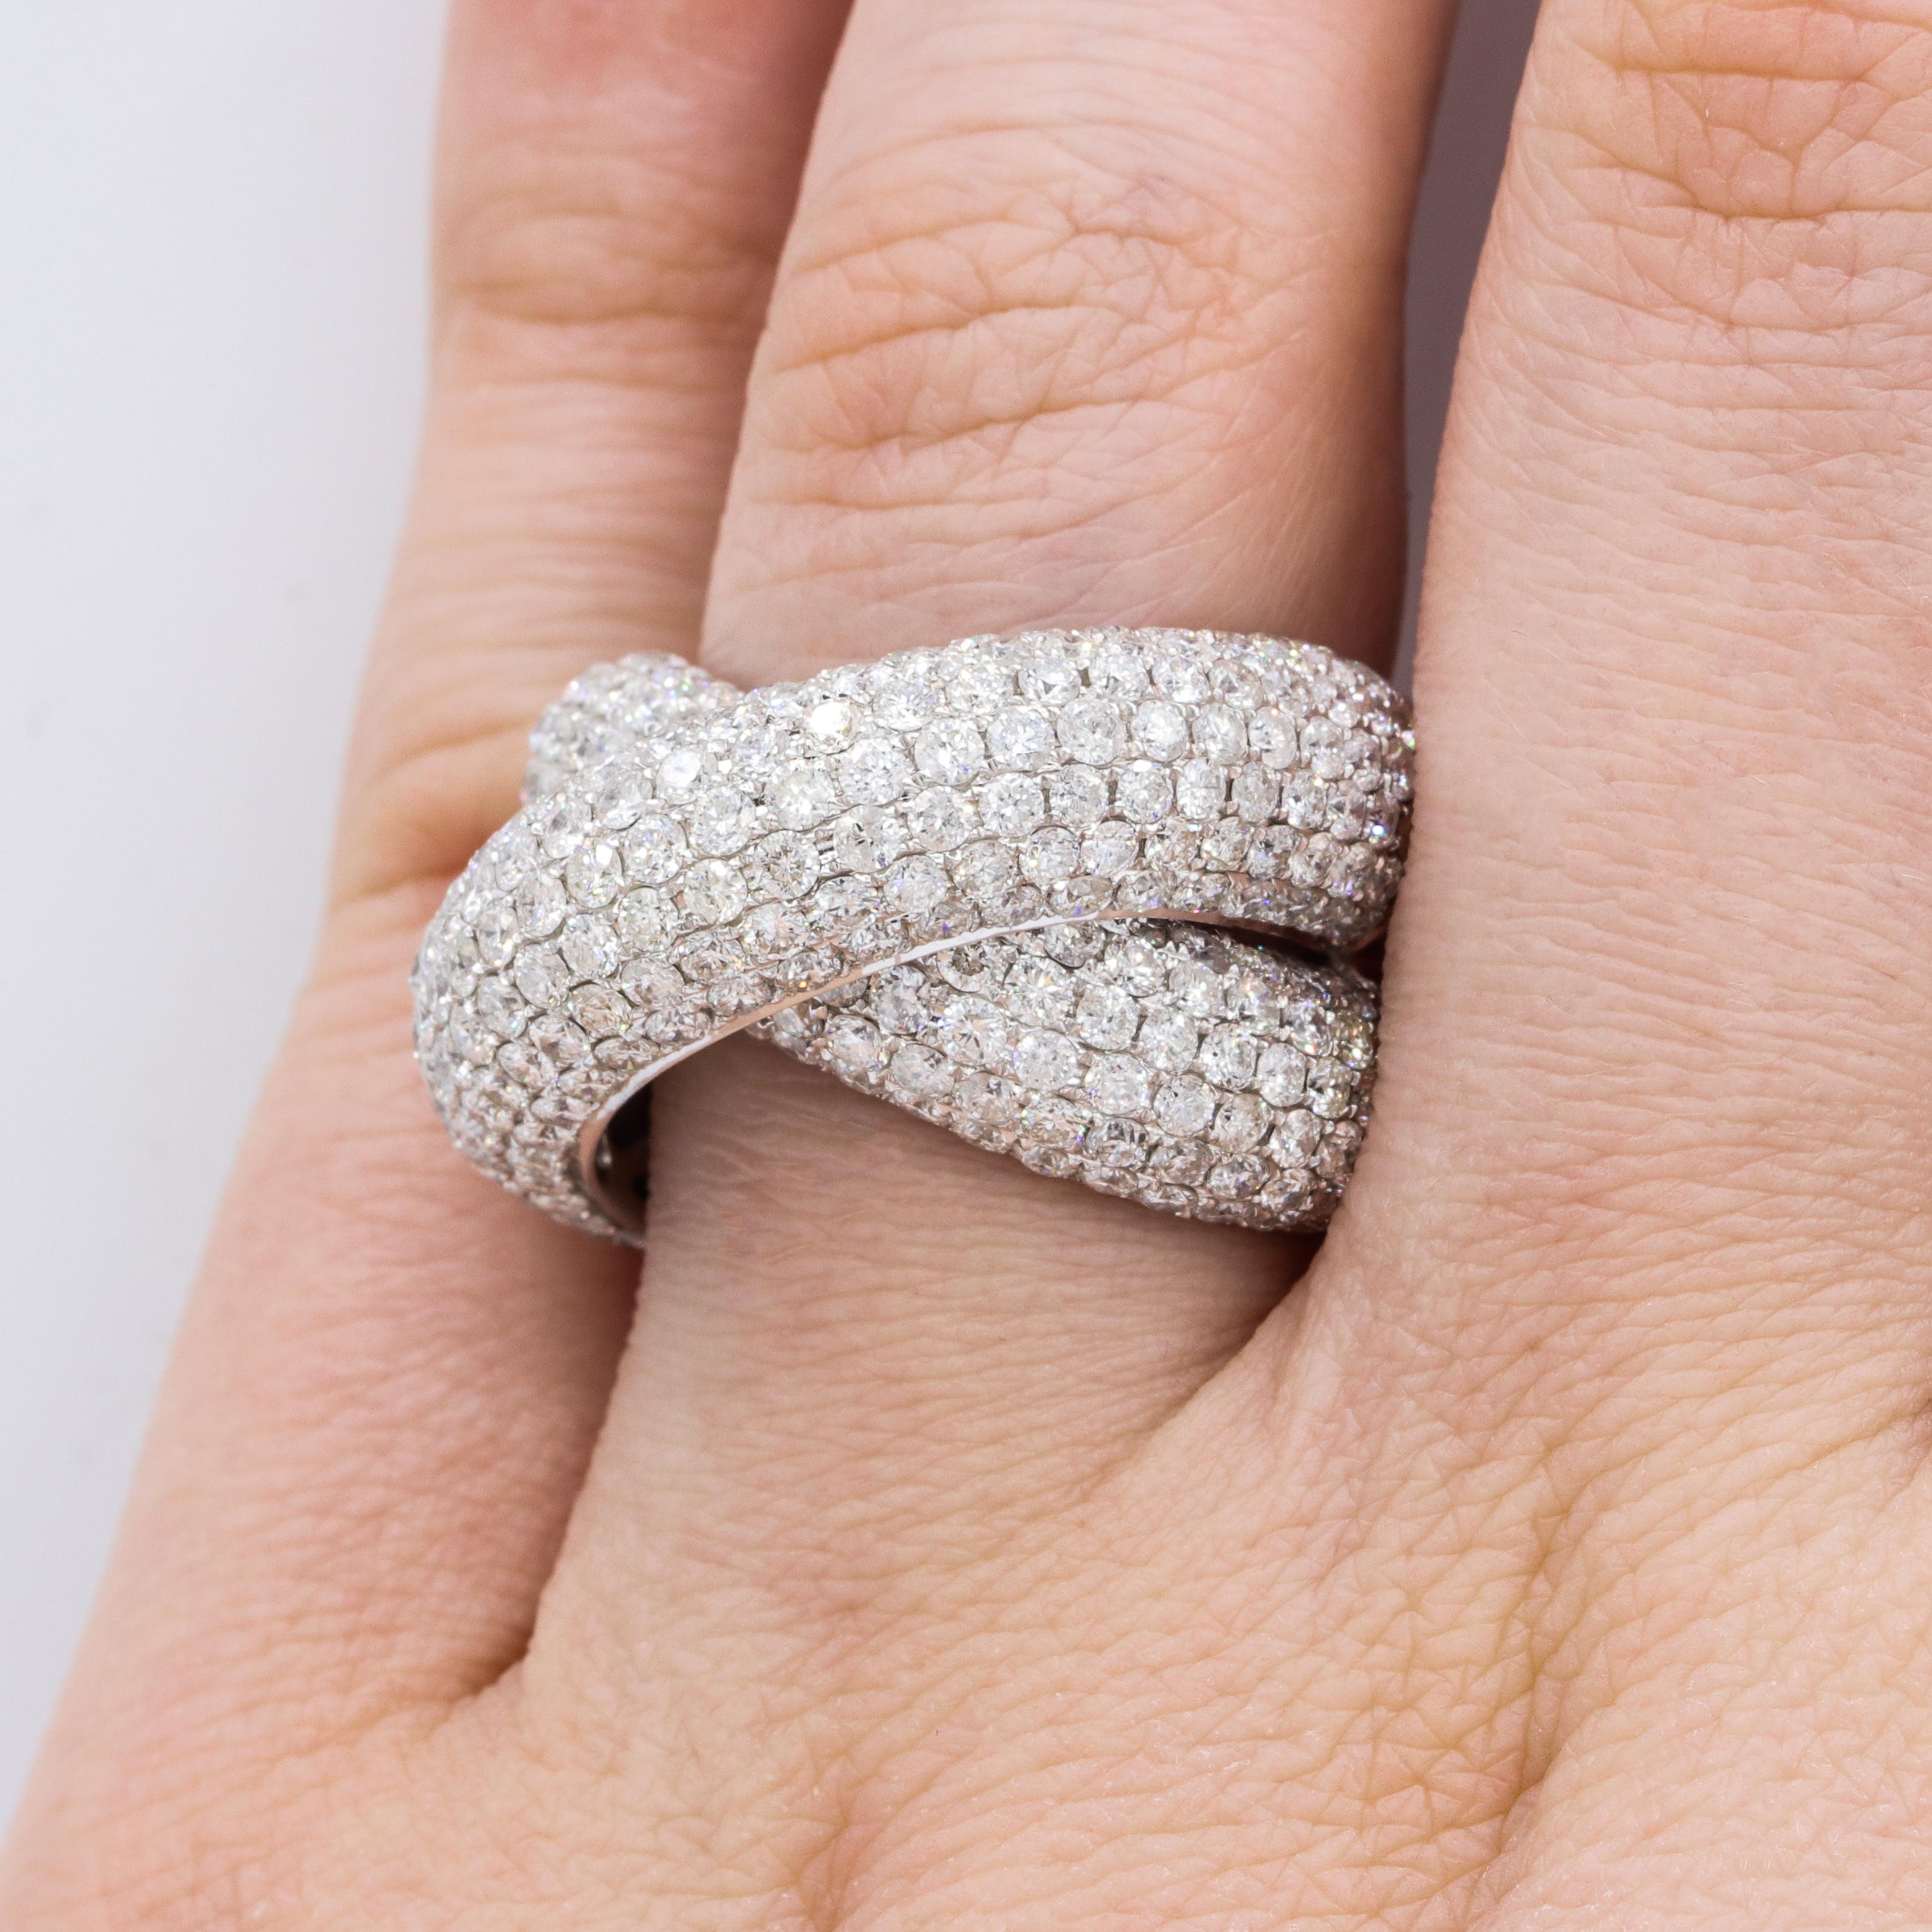 18W White Gold Puffy Criss Cross Ring features 4.87 carats of round diamonds.